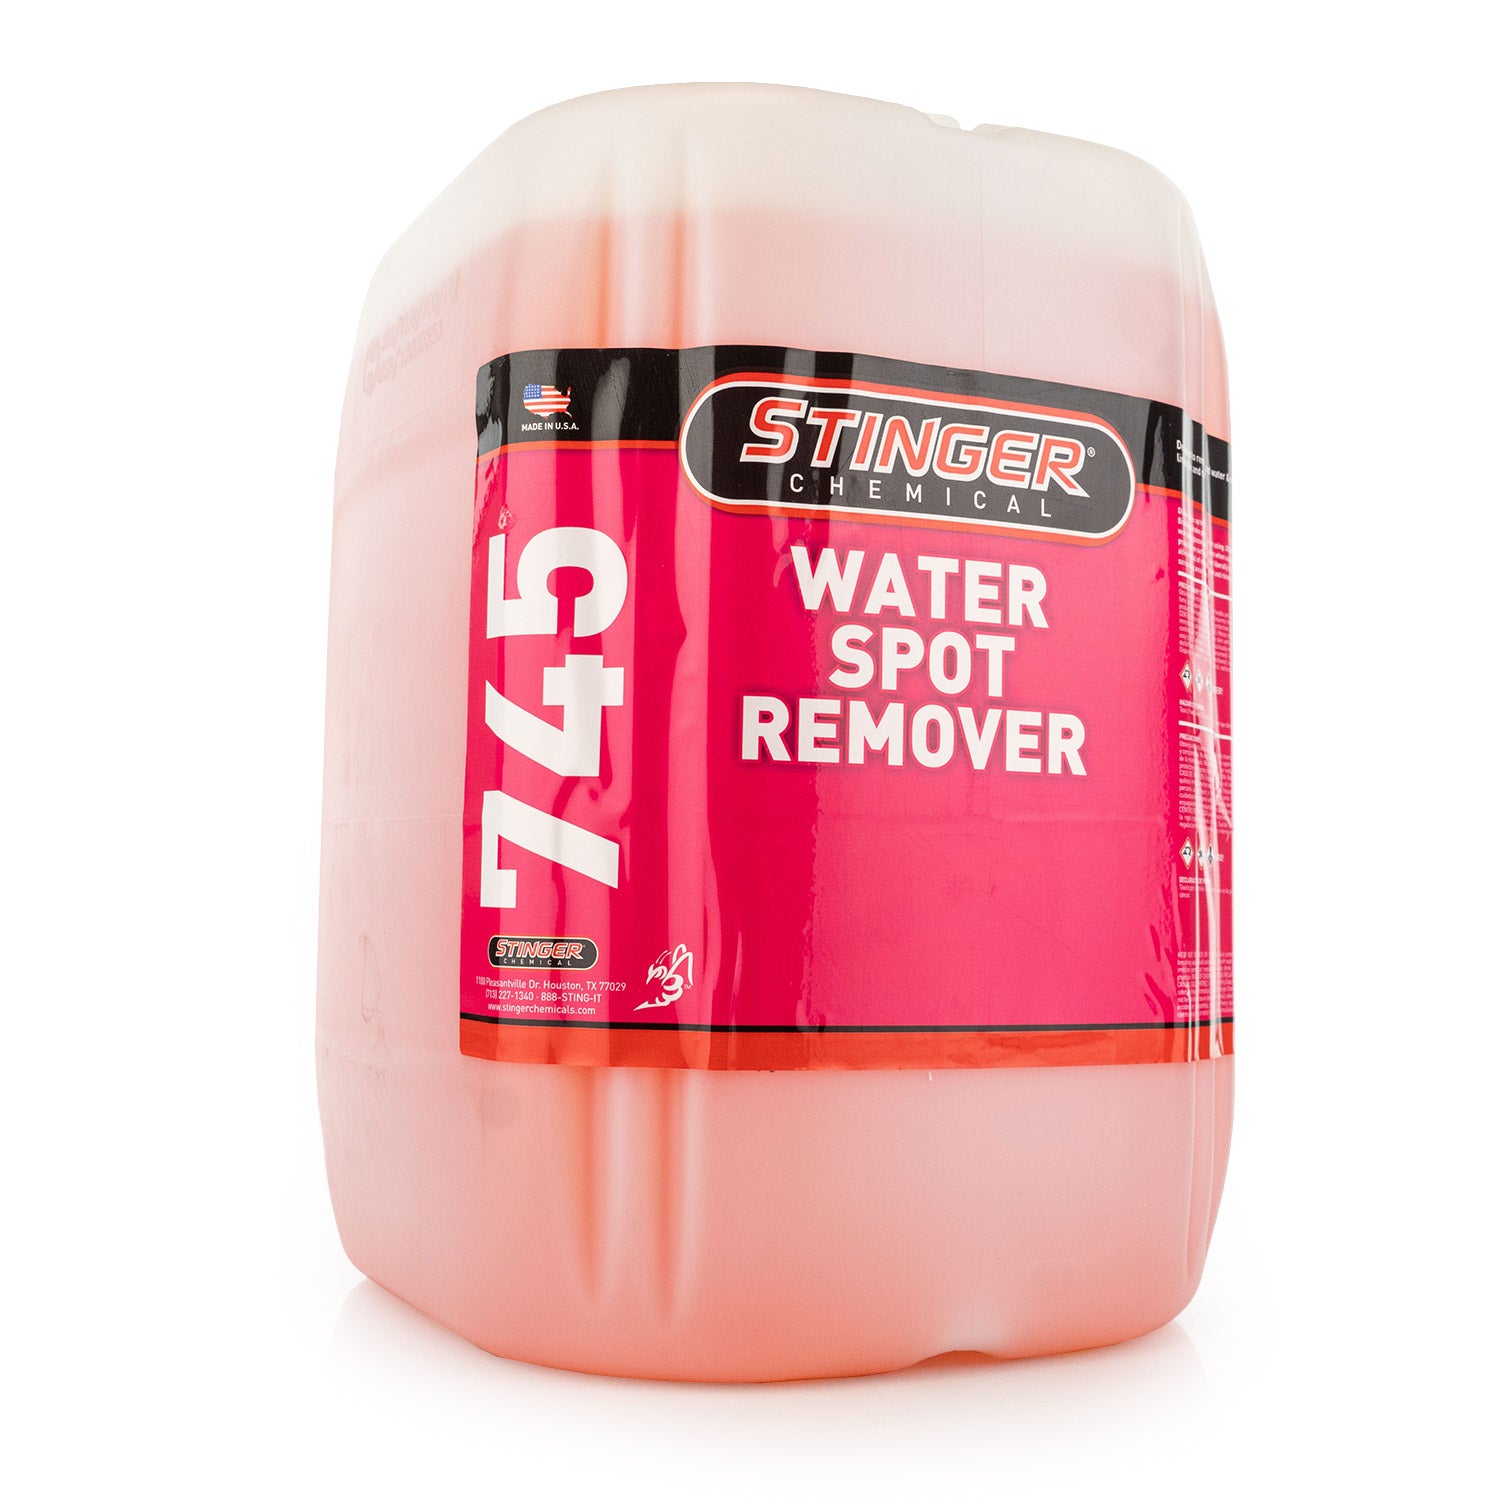 Water Spot Remover